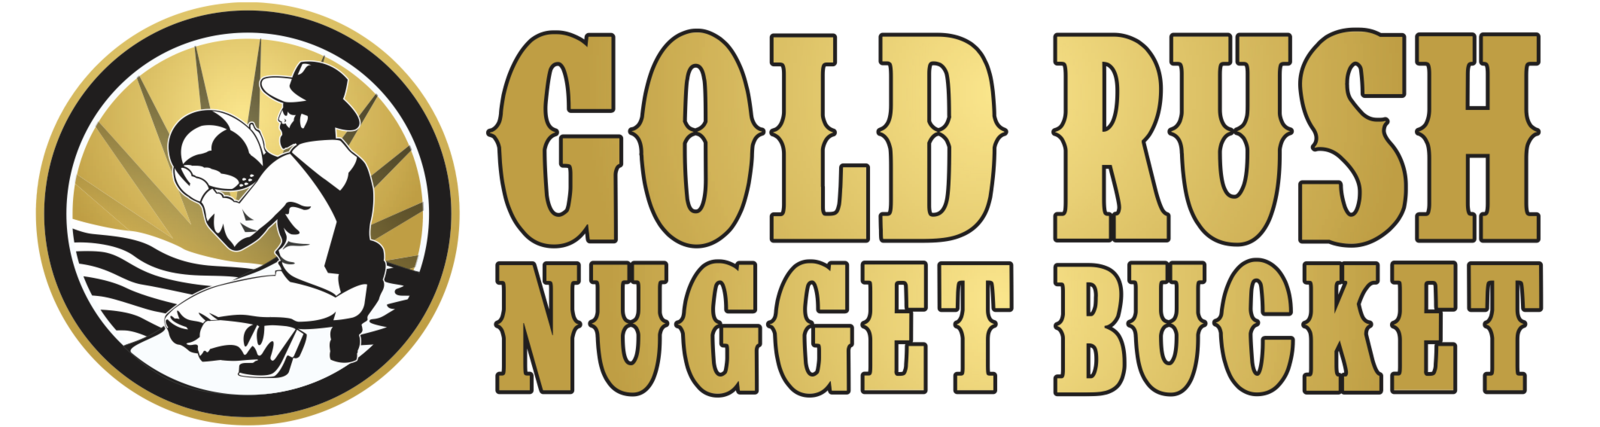 gold nugget gold rush